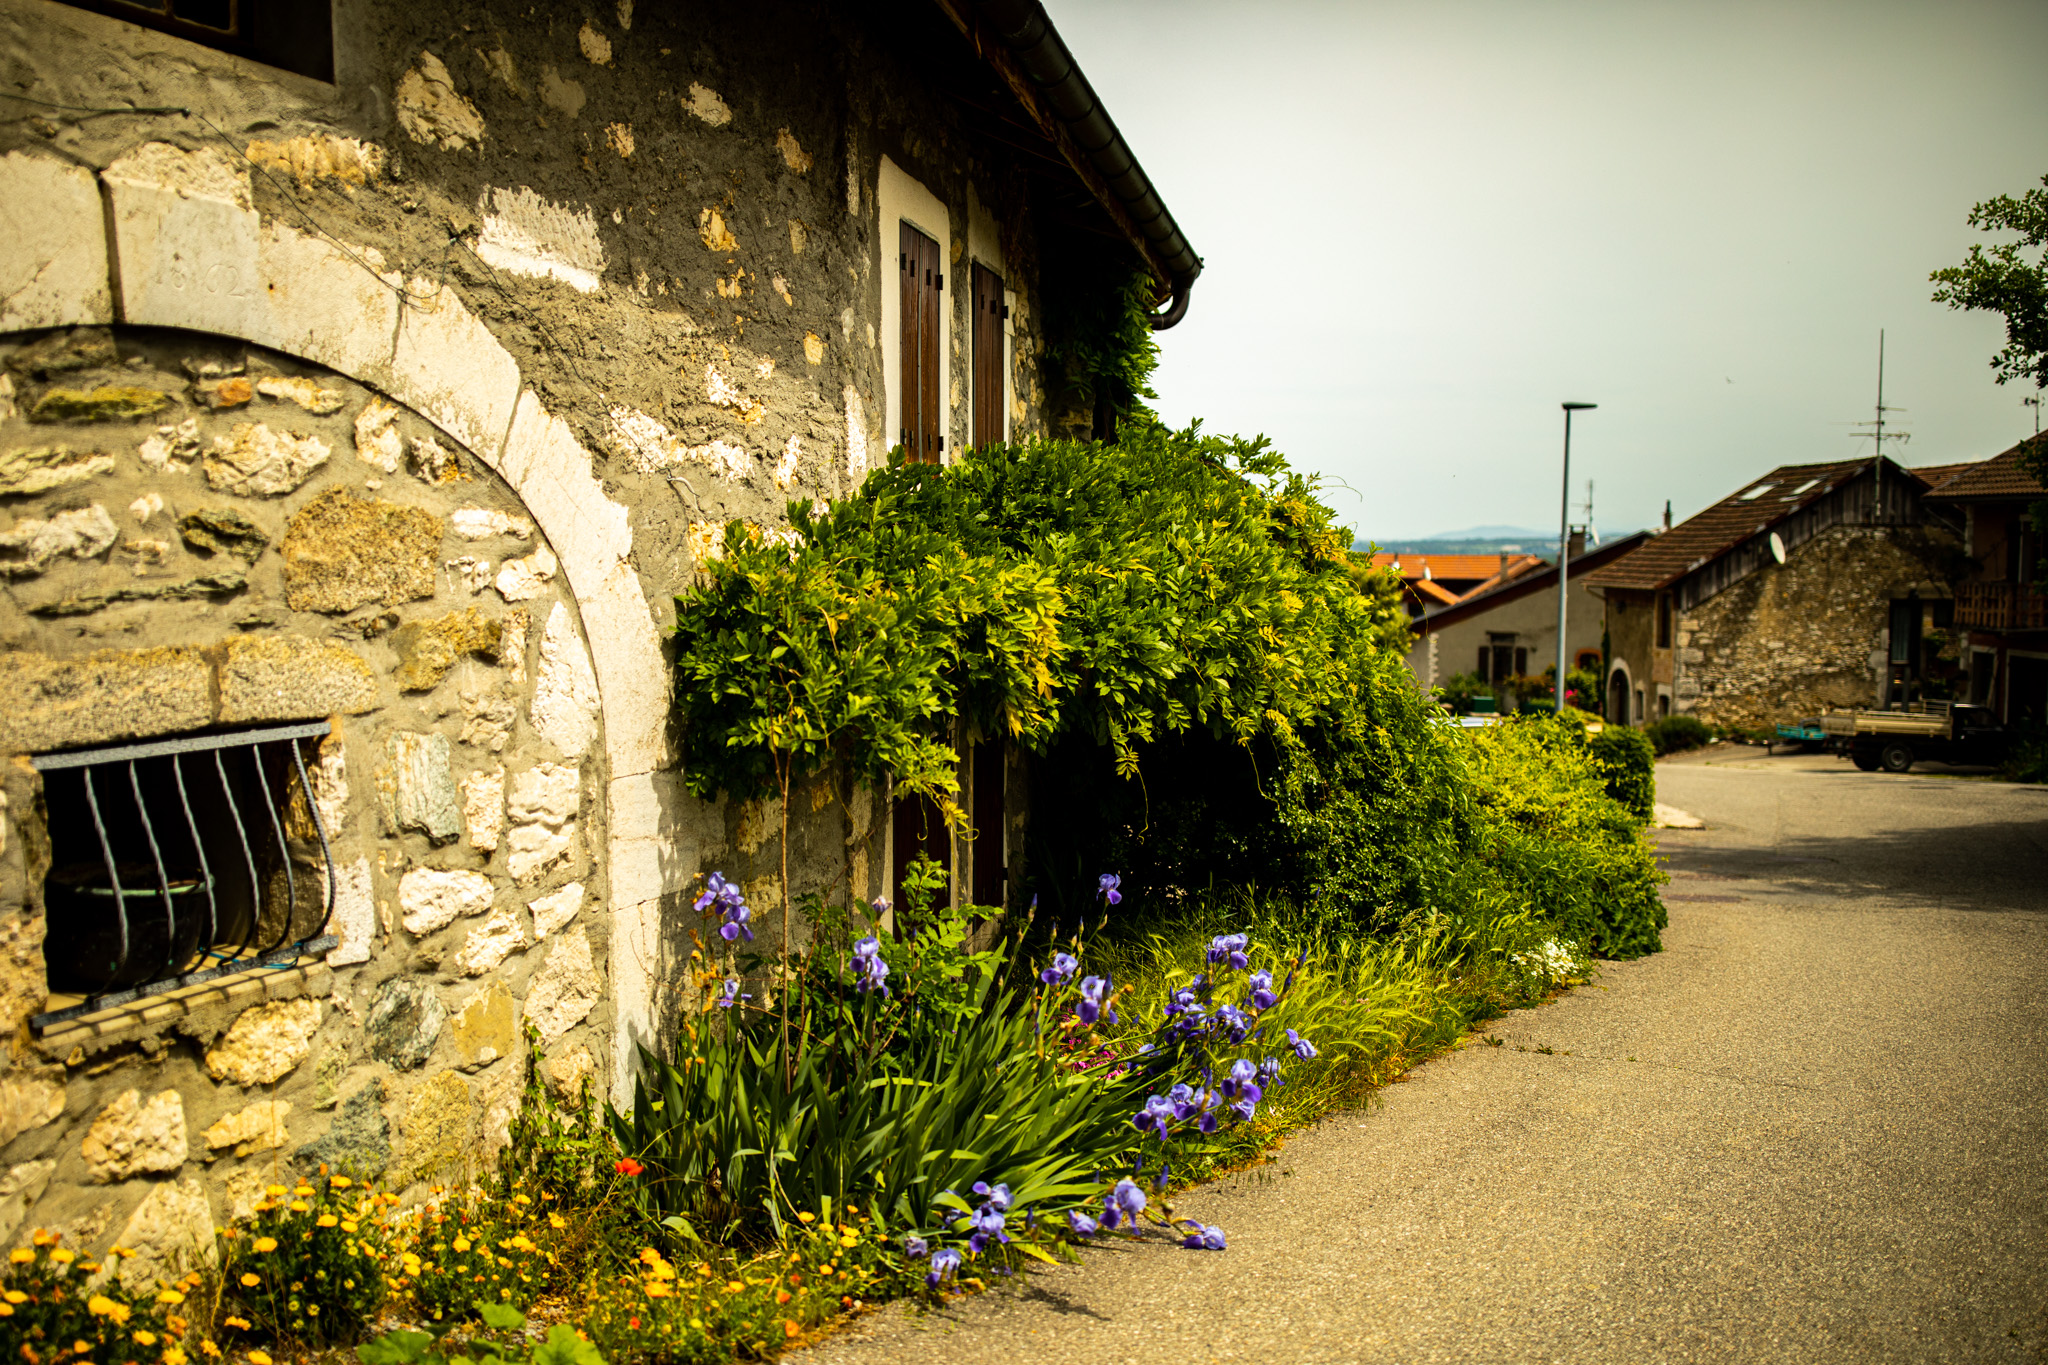 Outdoors Photography Building House Village Flowers Greenery Nature Stone Road 2048x1365